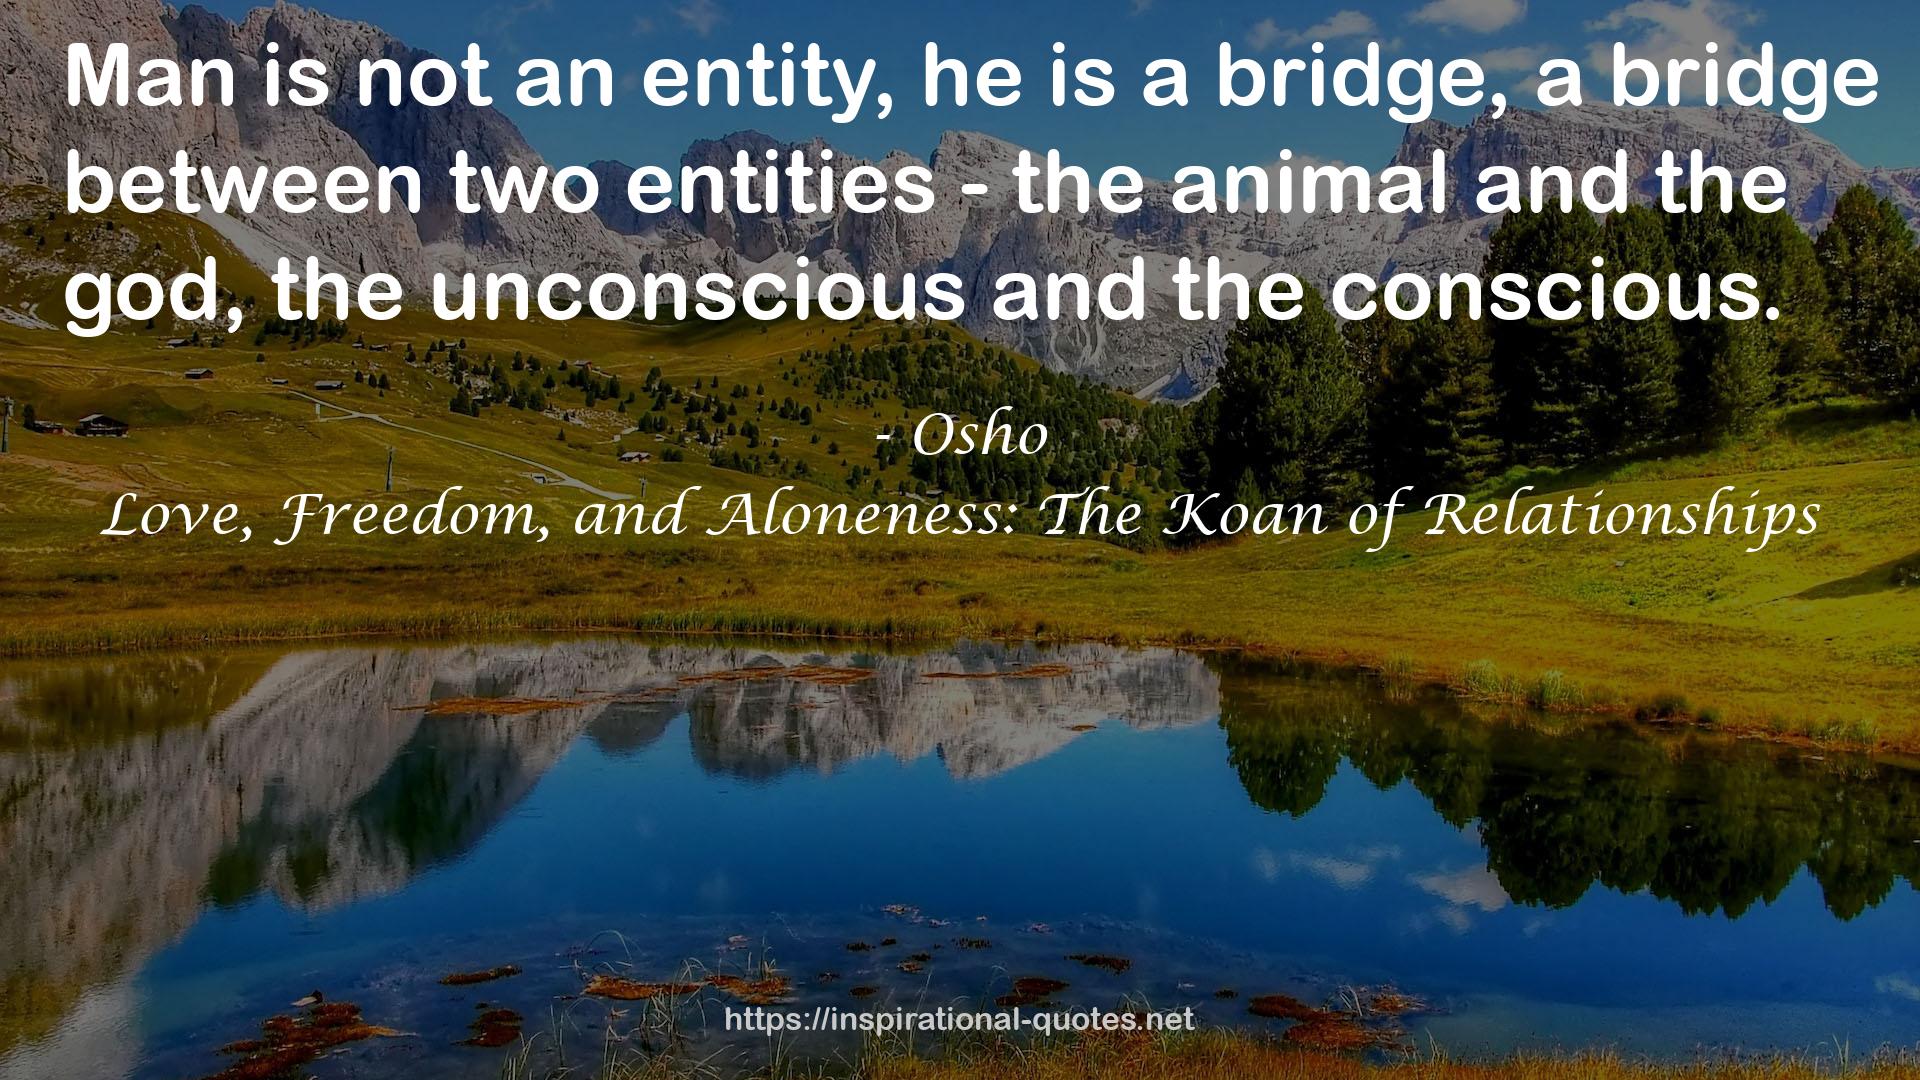 Love, Freedom, and Aloneness: The Koan of Relationships QUOTES